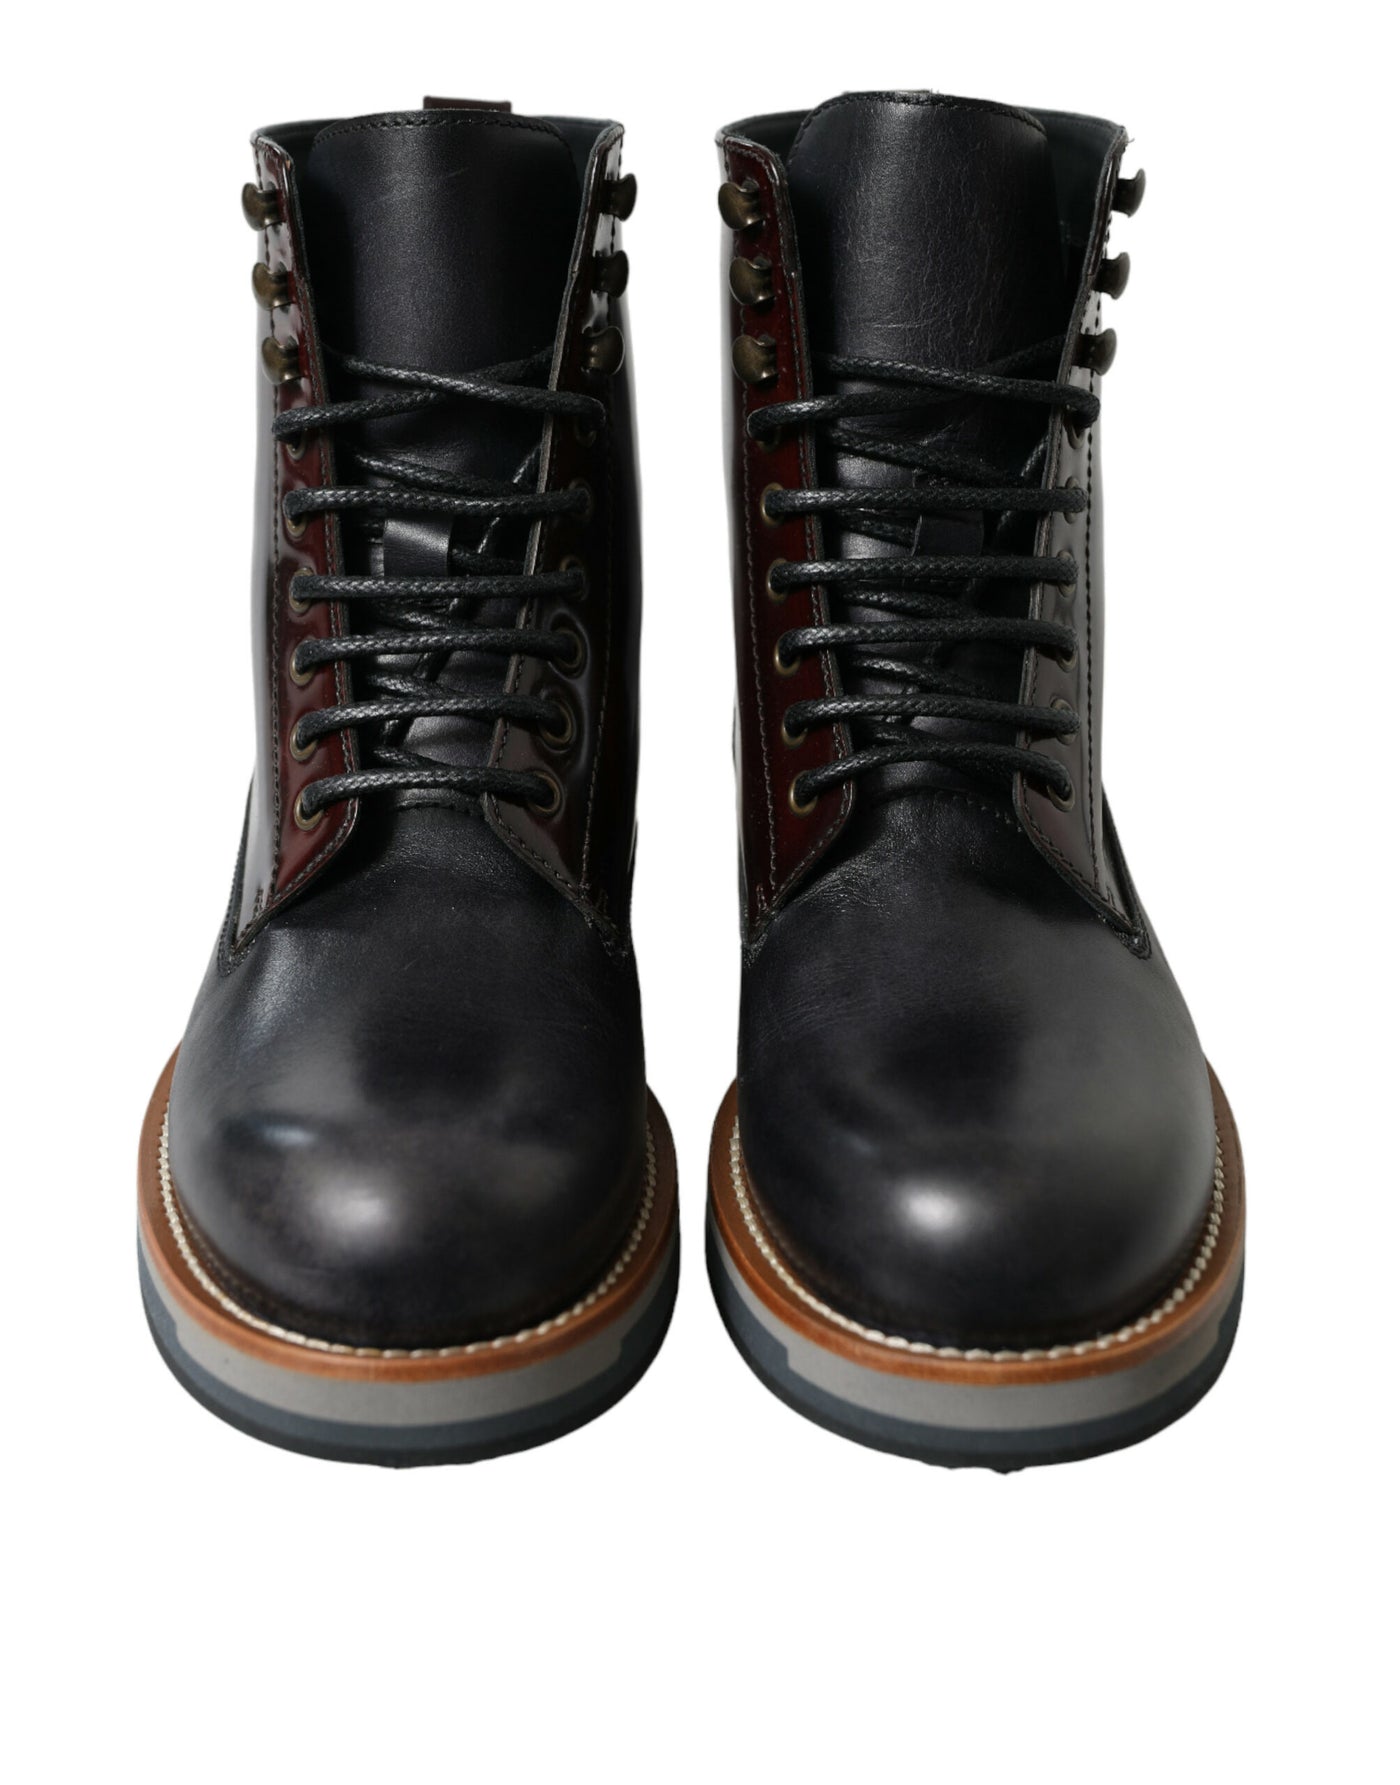 Dolce & Gabbana Black Leather Military Combat Boots Shoes